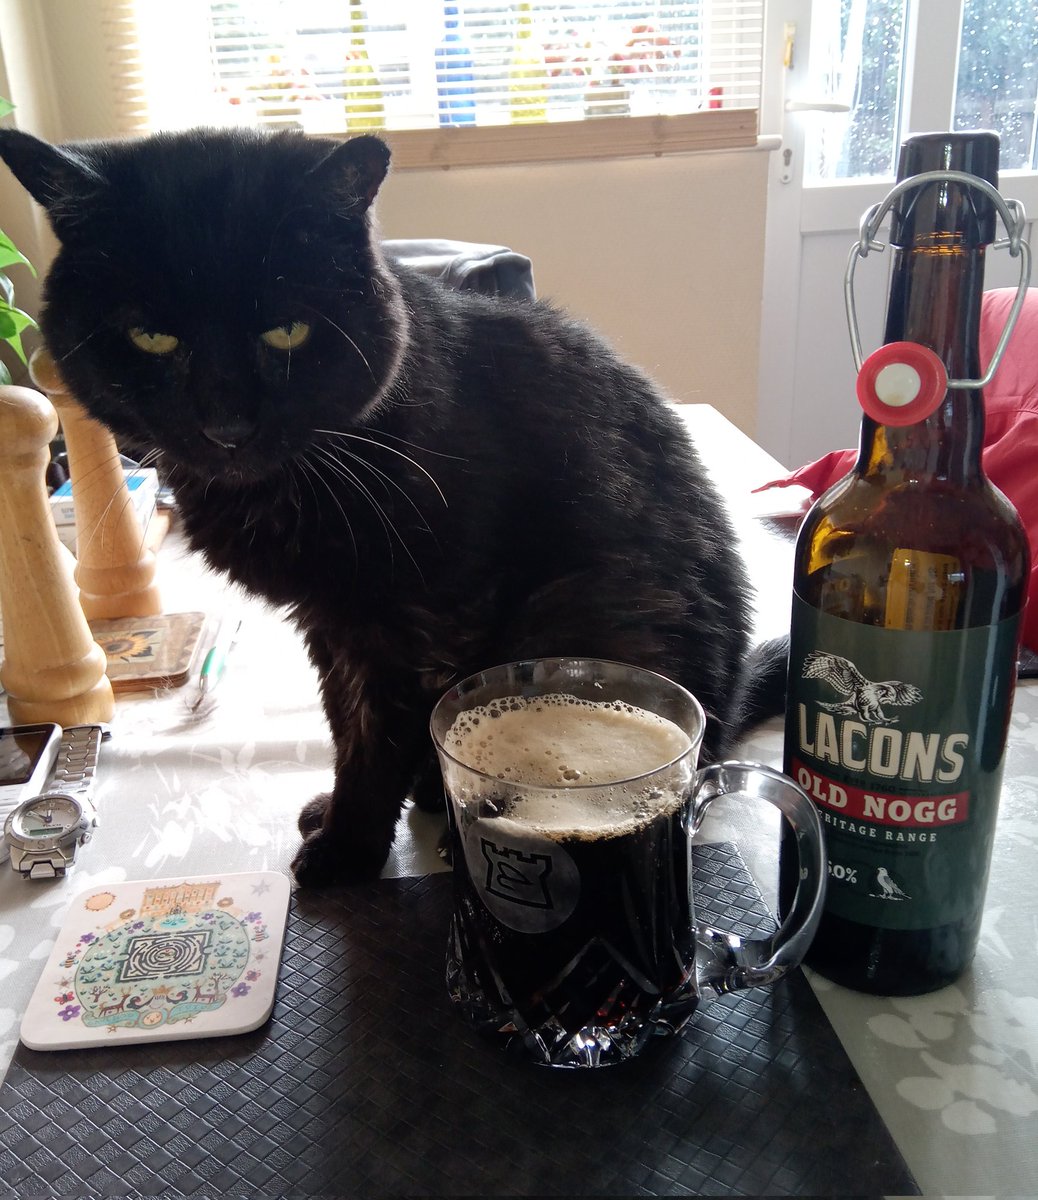 Today's Beer O'clock with Old Cloth Ears features a bottle I've saved for 4 years or so. @LaconsBrewery Old Nogg at 6%ABV, one of their Heritage Range. BB 01/26. A full bodied Old Ale with much complexity. Cheers 🍻